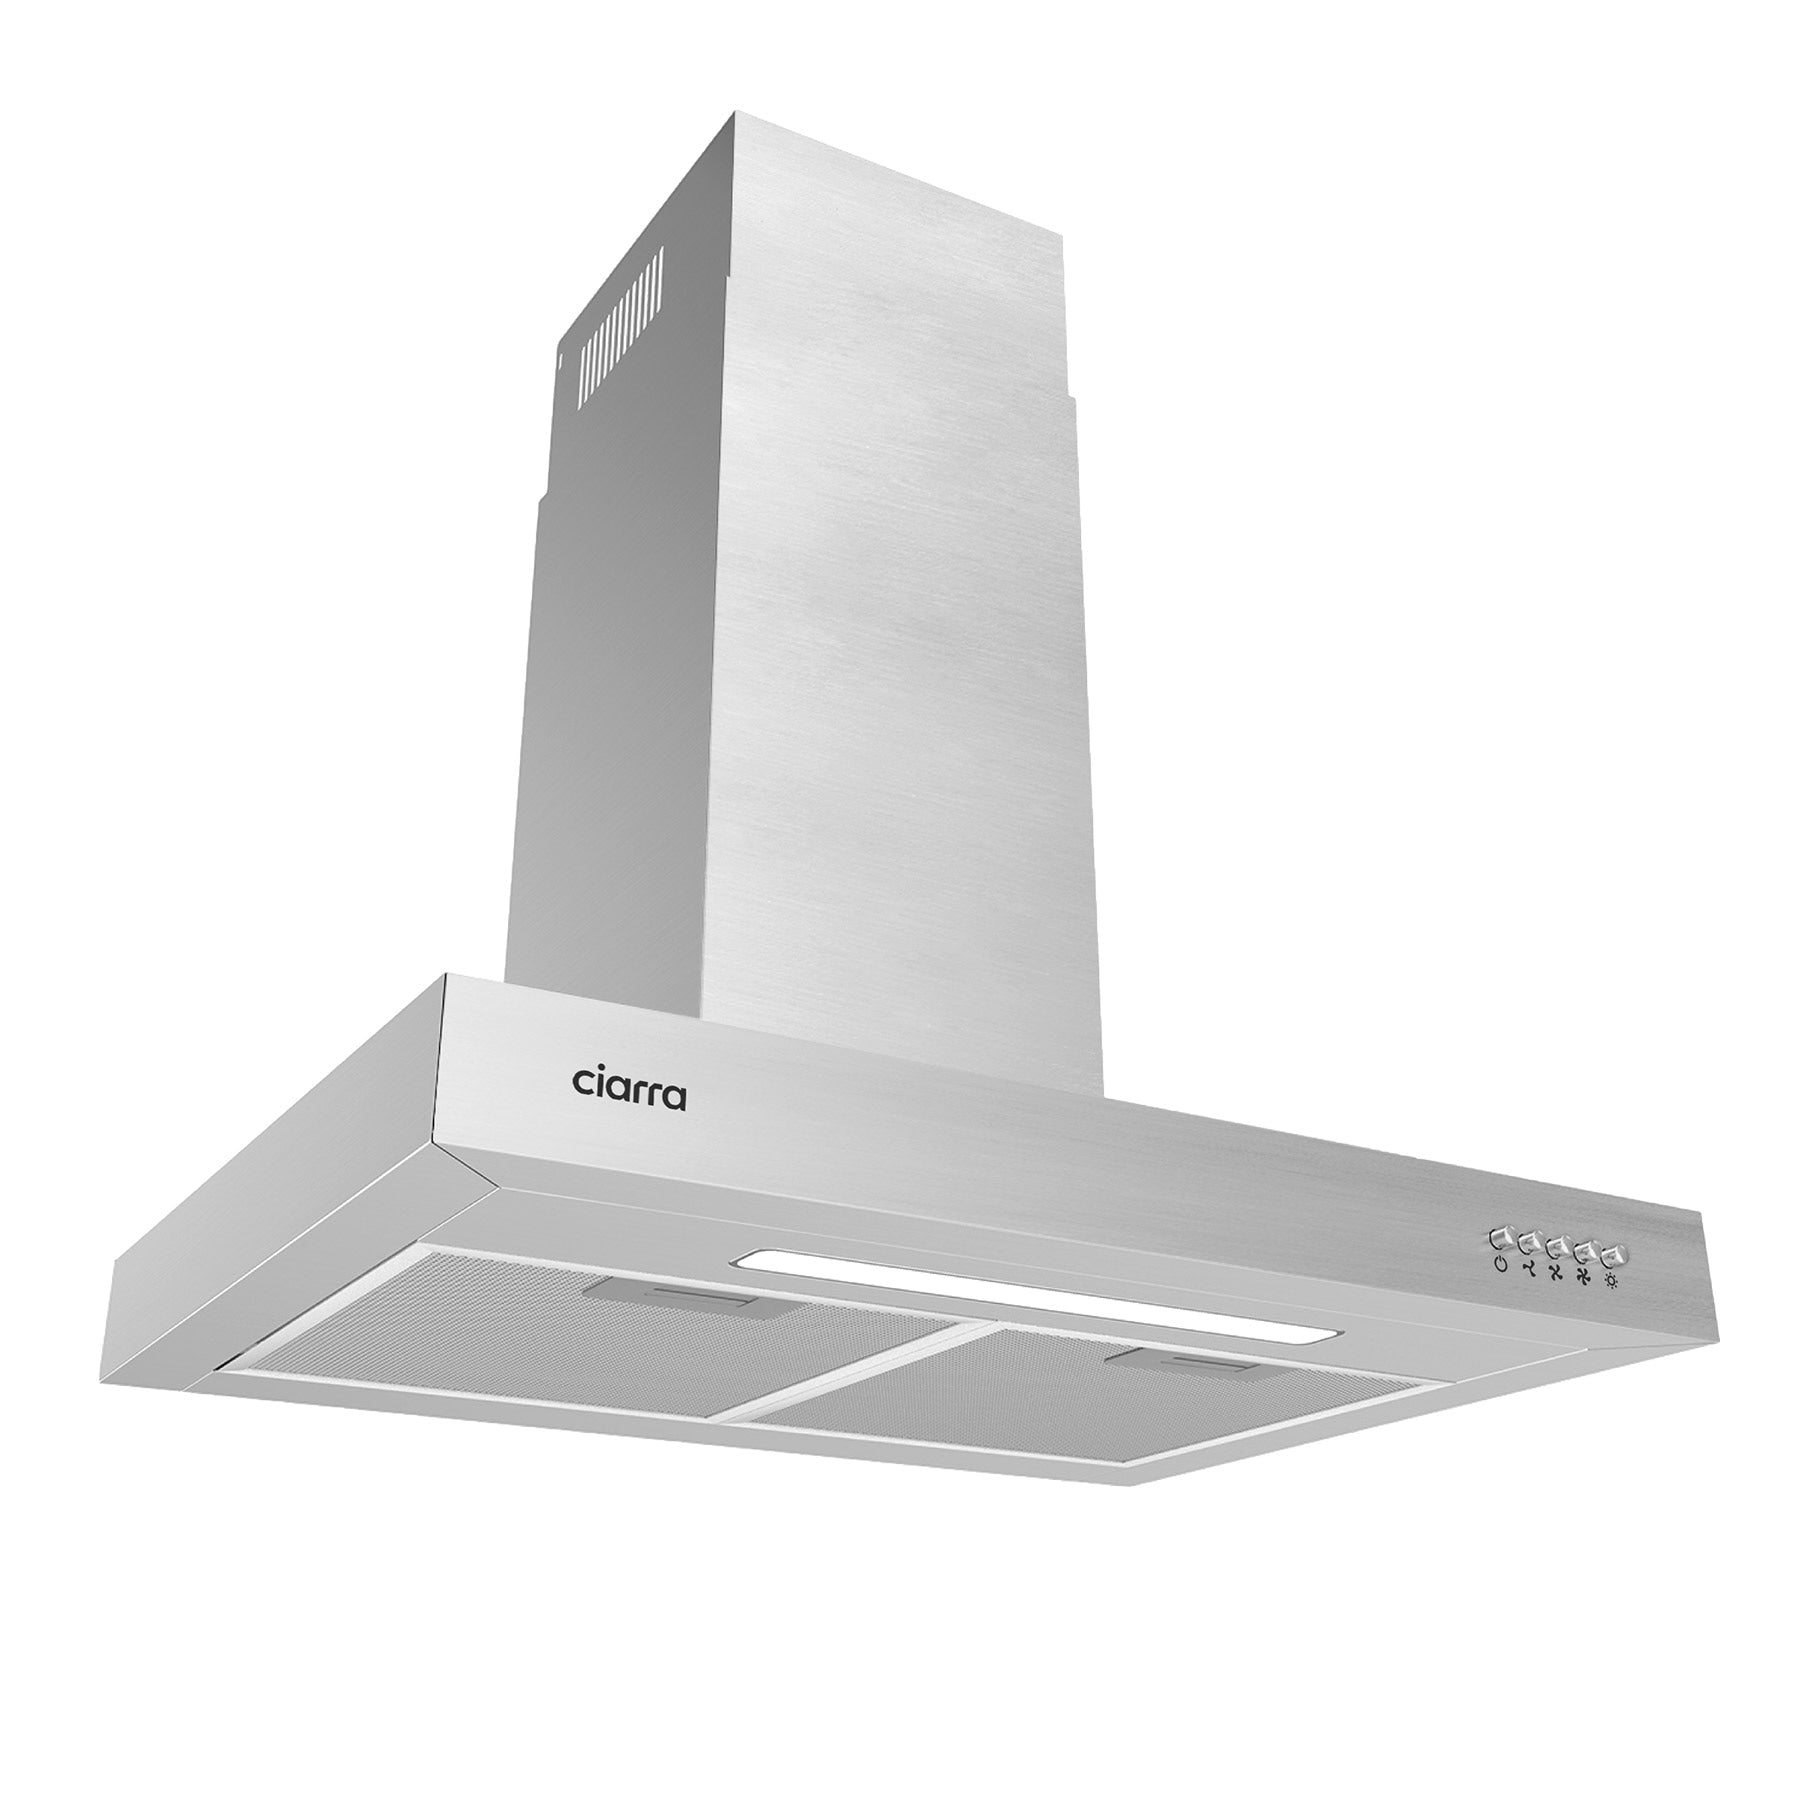 CIARRA 60cm Wall Mount Cooker Hood with 3-speed Extraction CBCB6201-OW